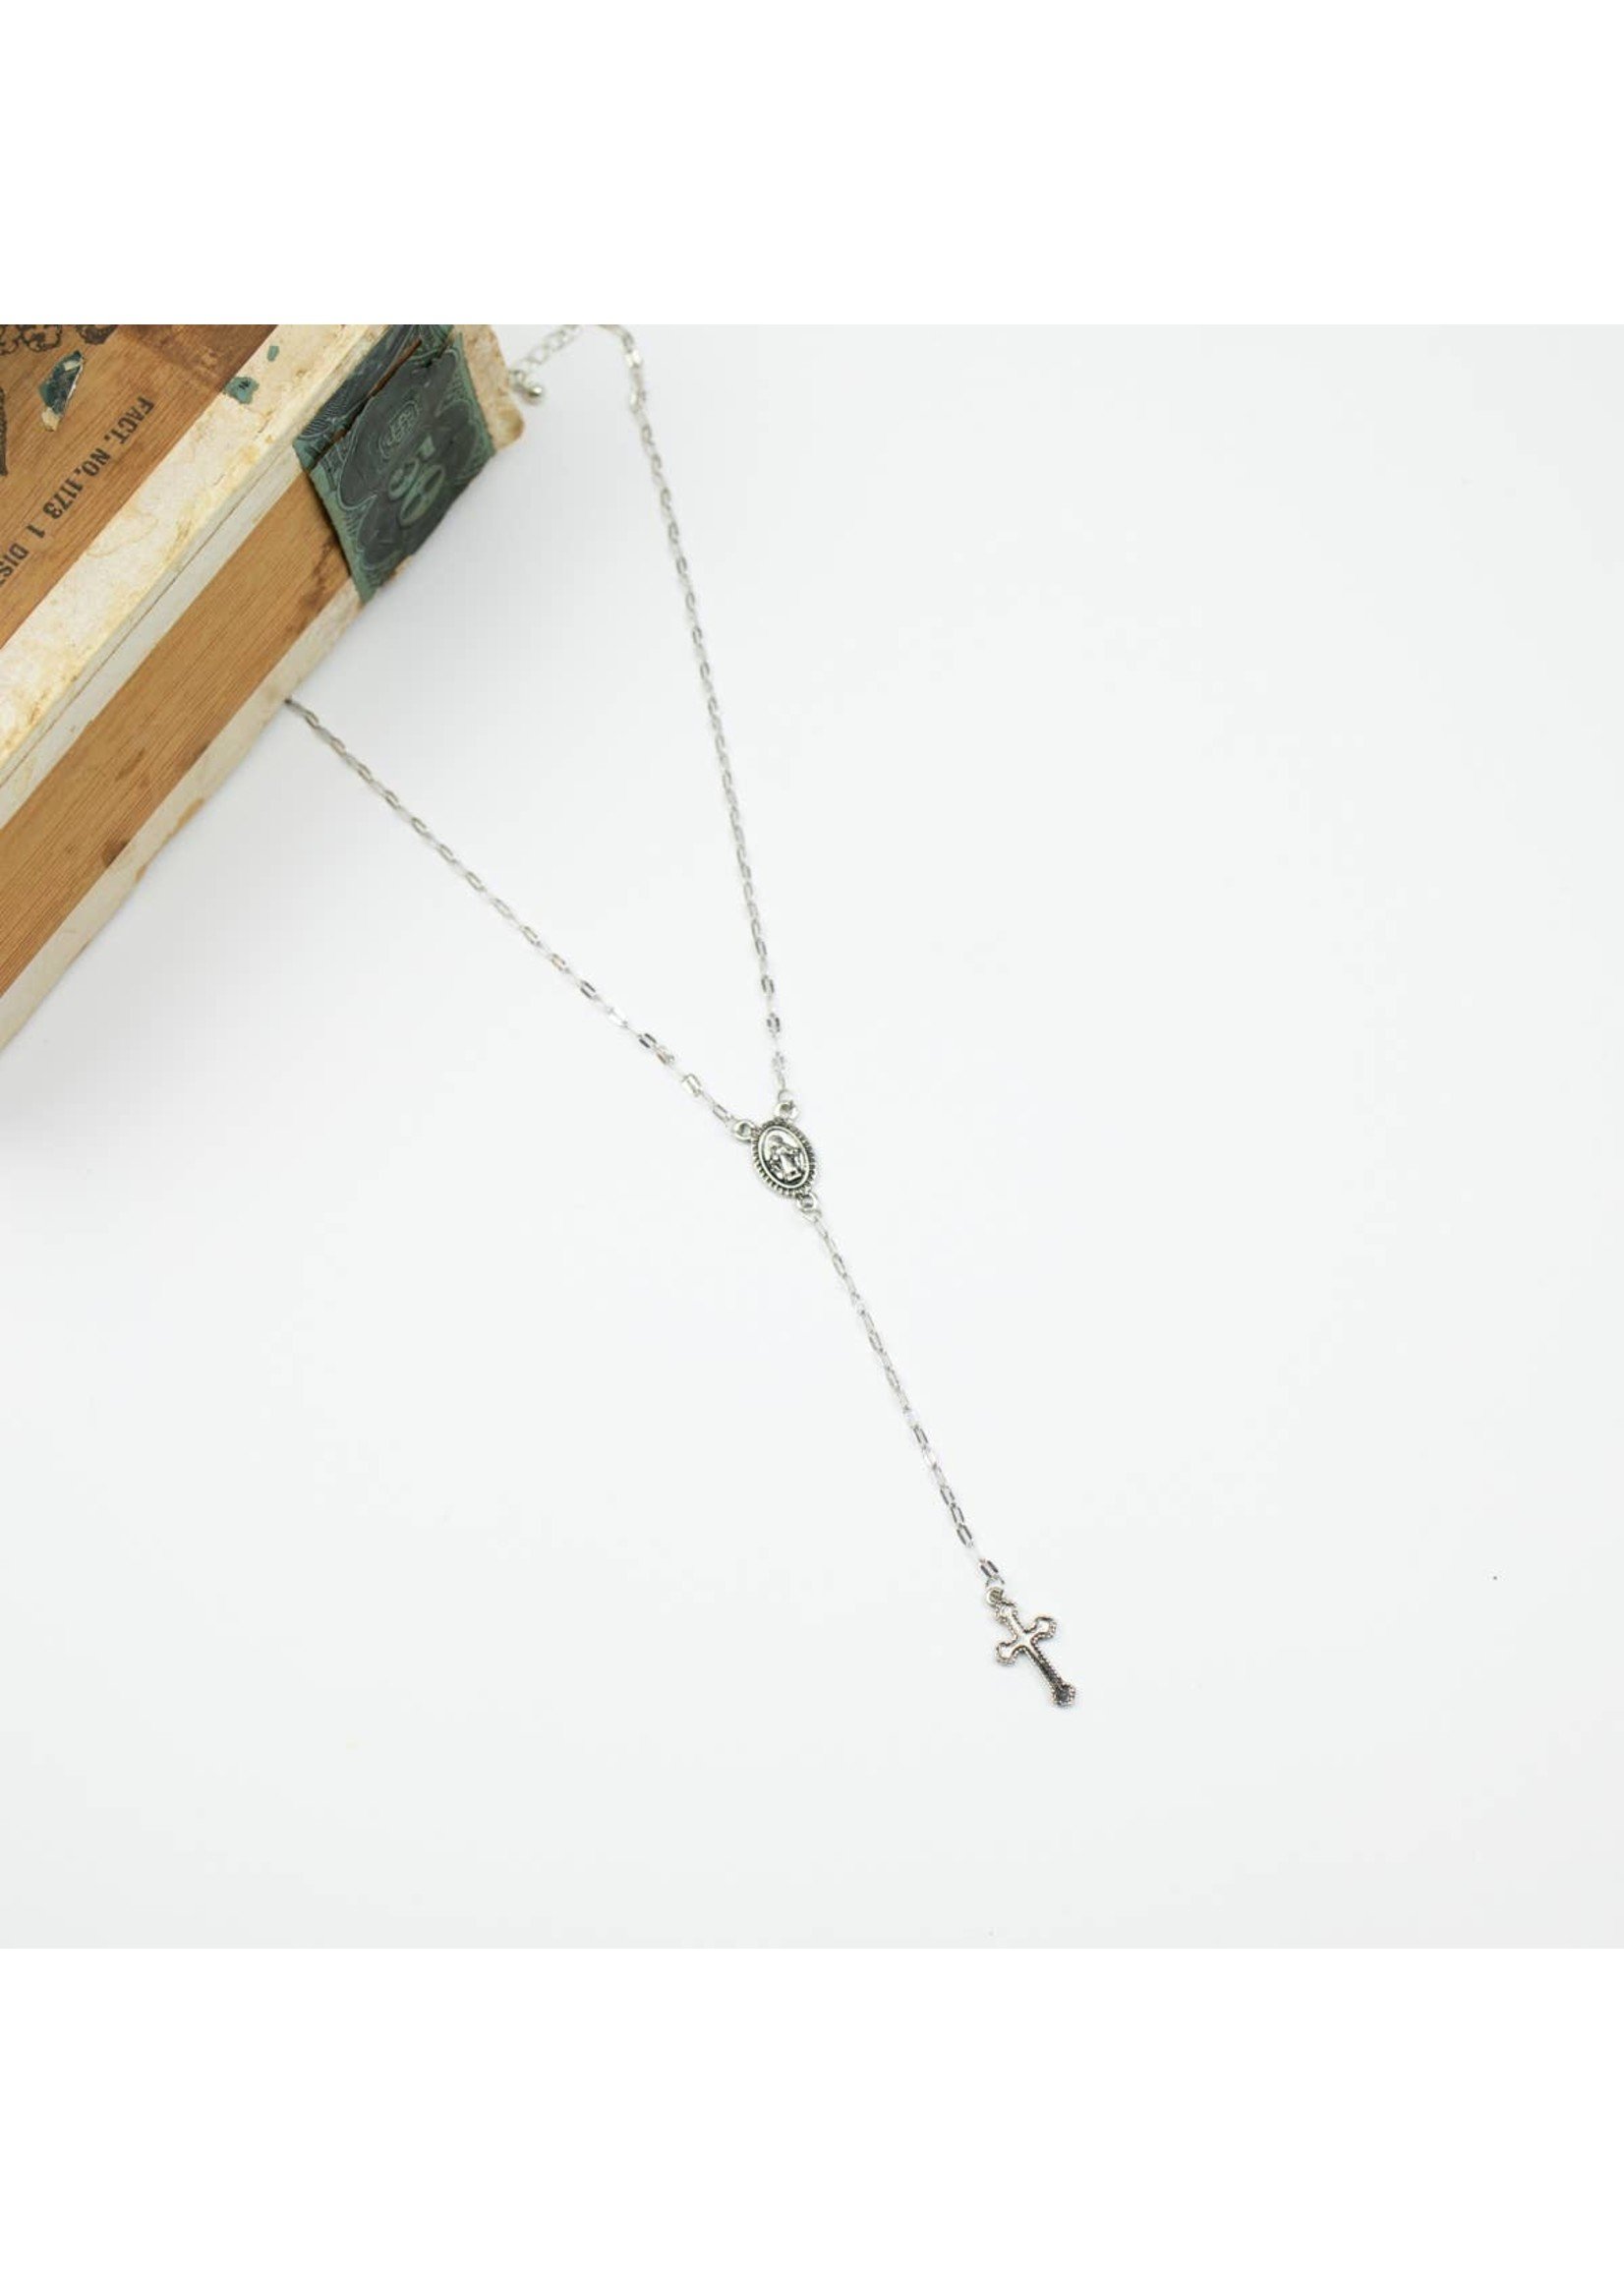 Lariat Style Medallion and Cross Necklace - Silvertone